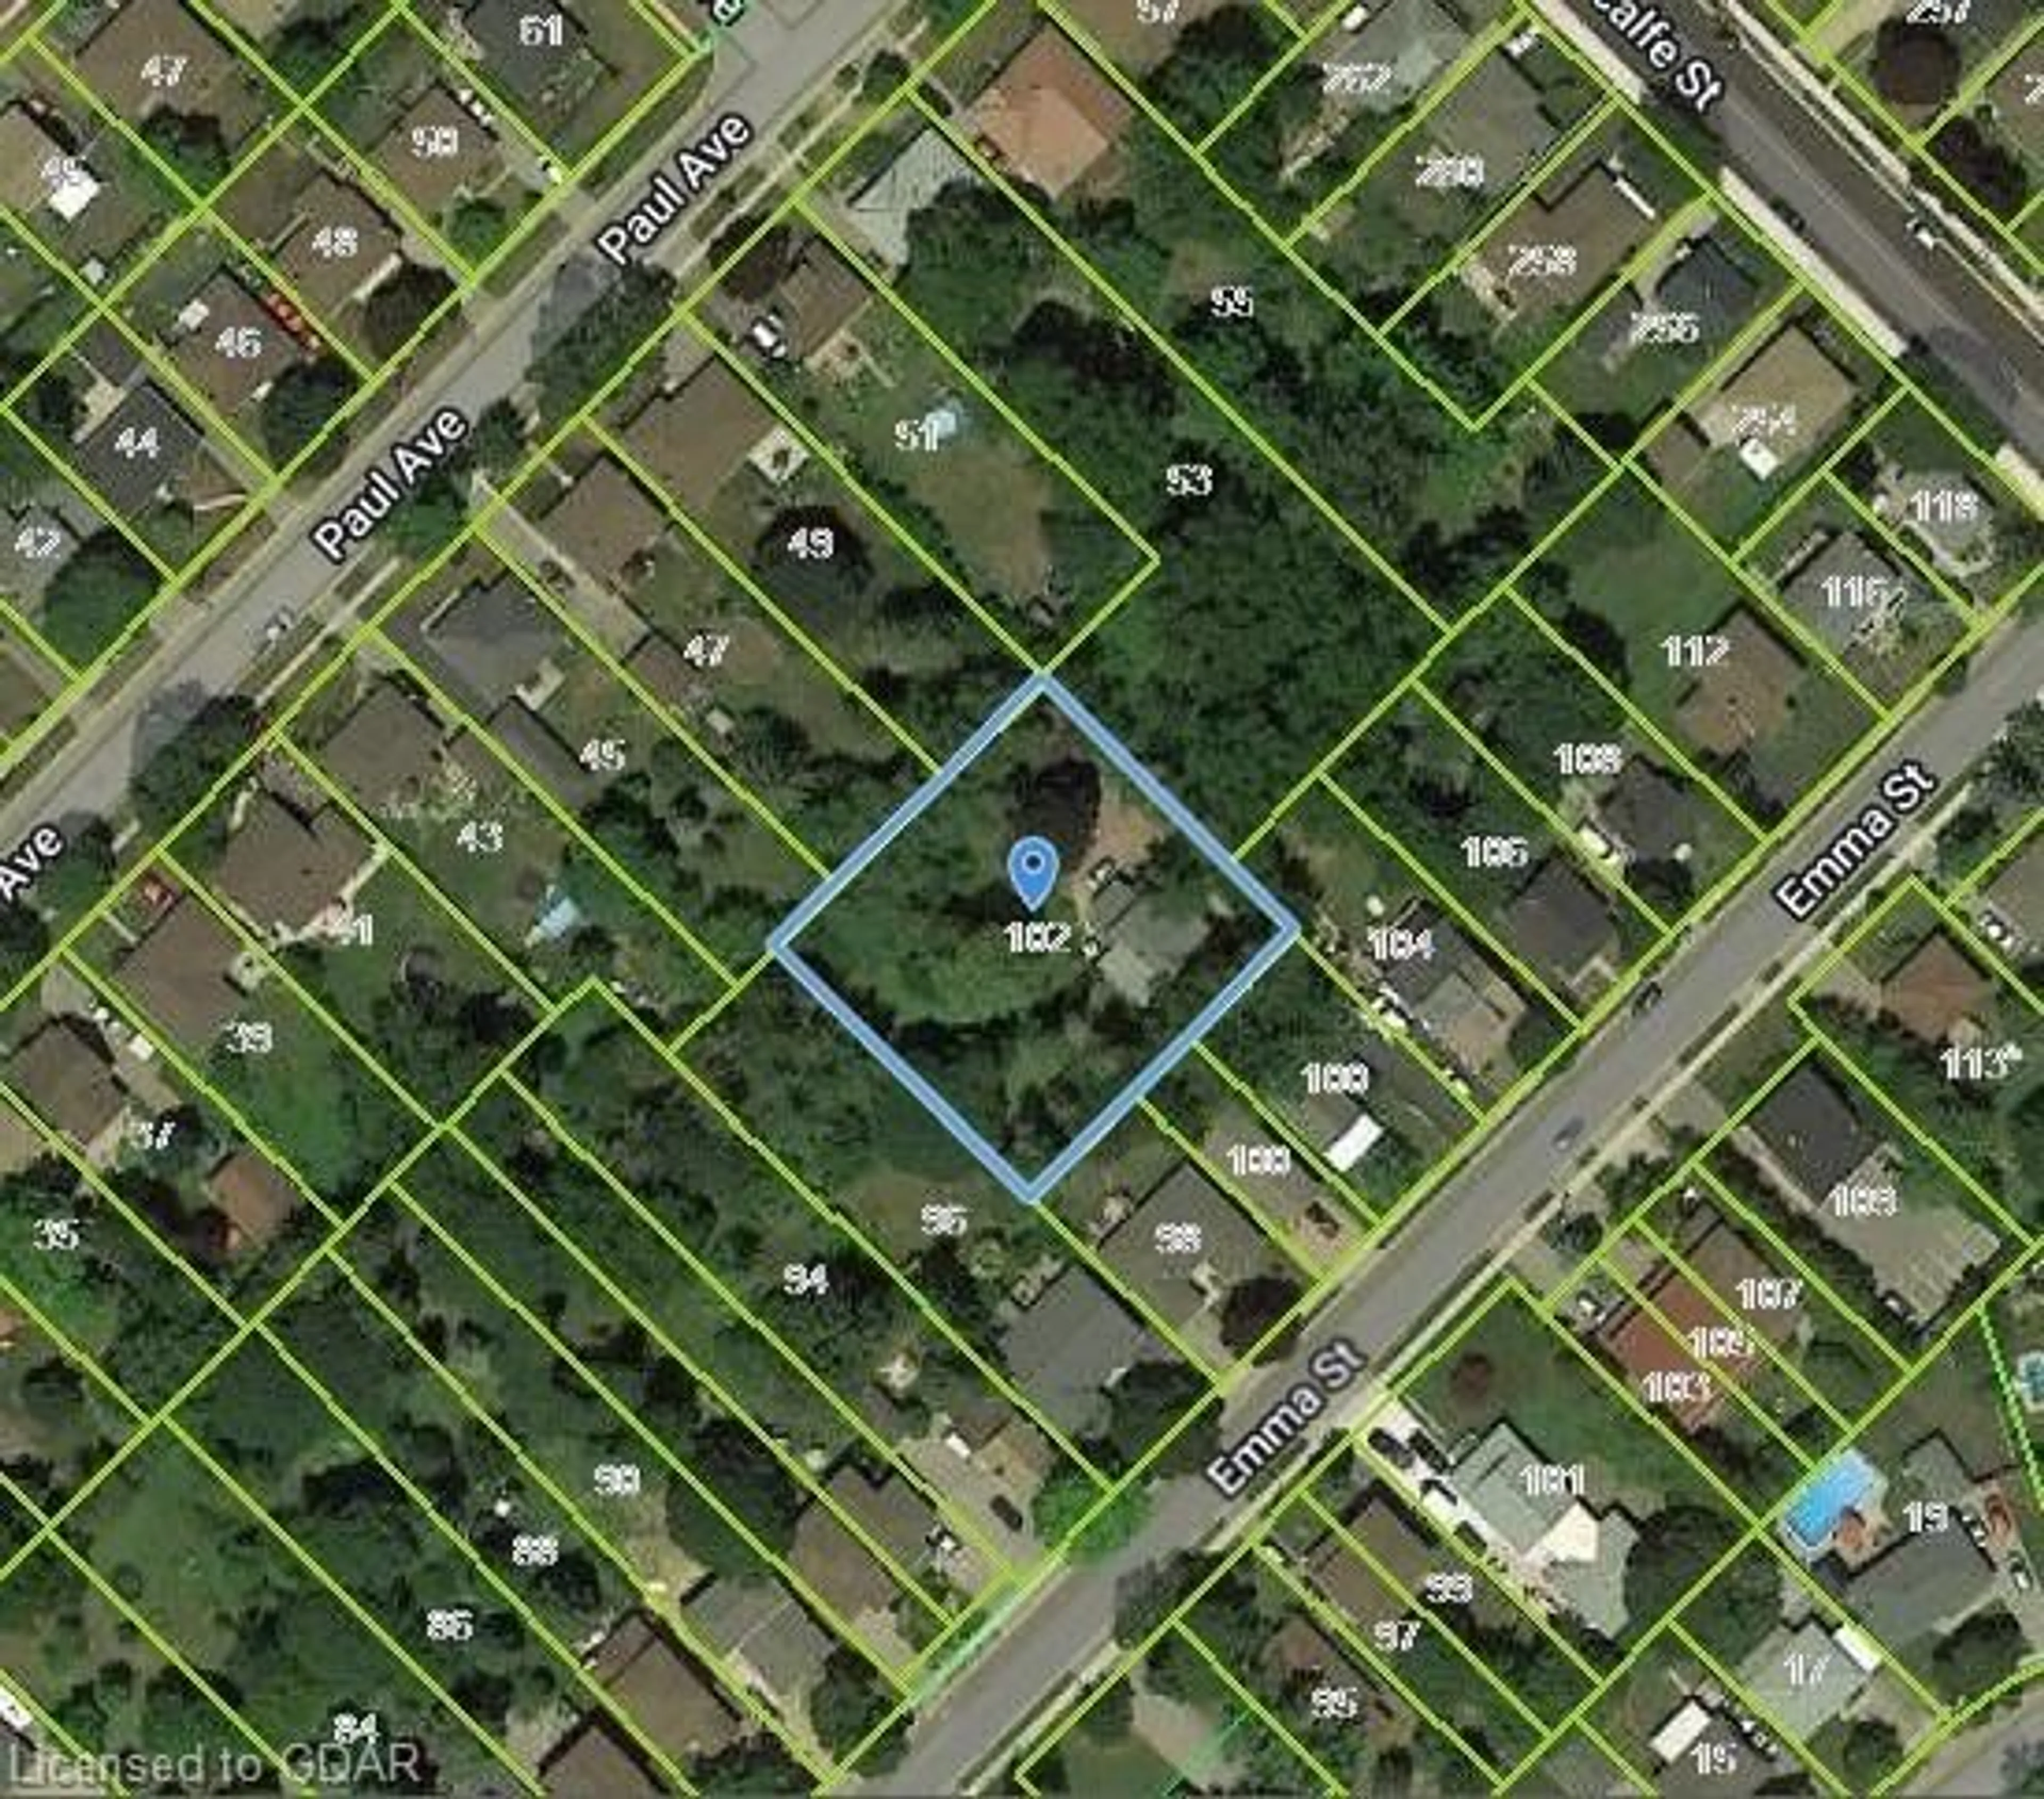 Picture of a map for 102 Emma St, Guelph Ontario N1E 1T8